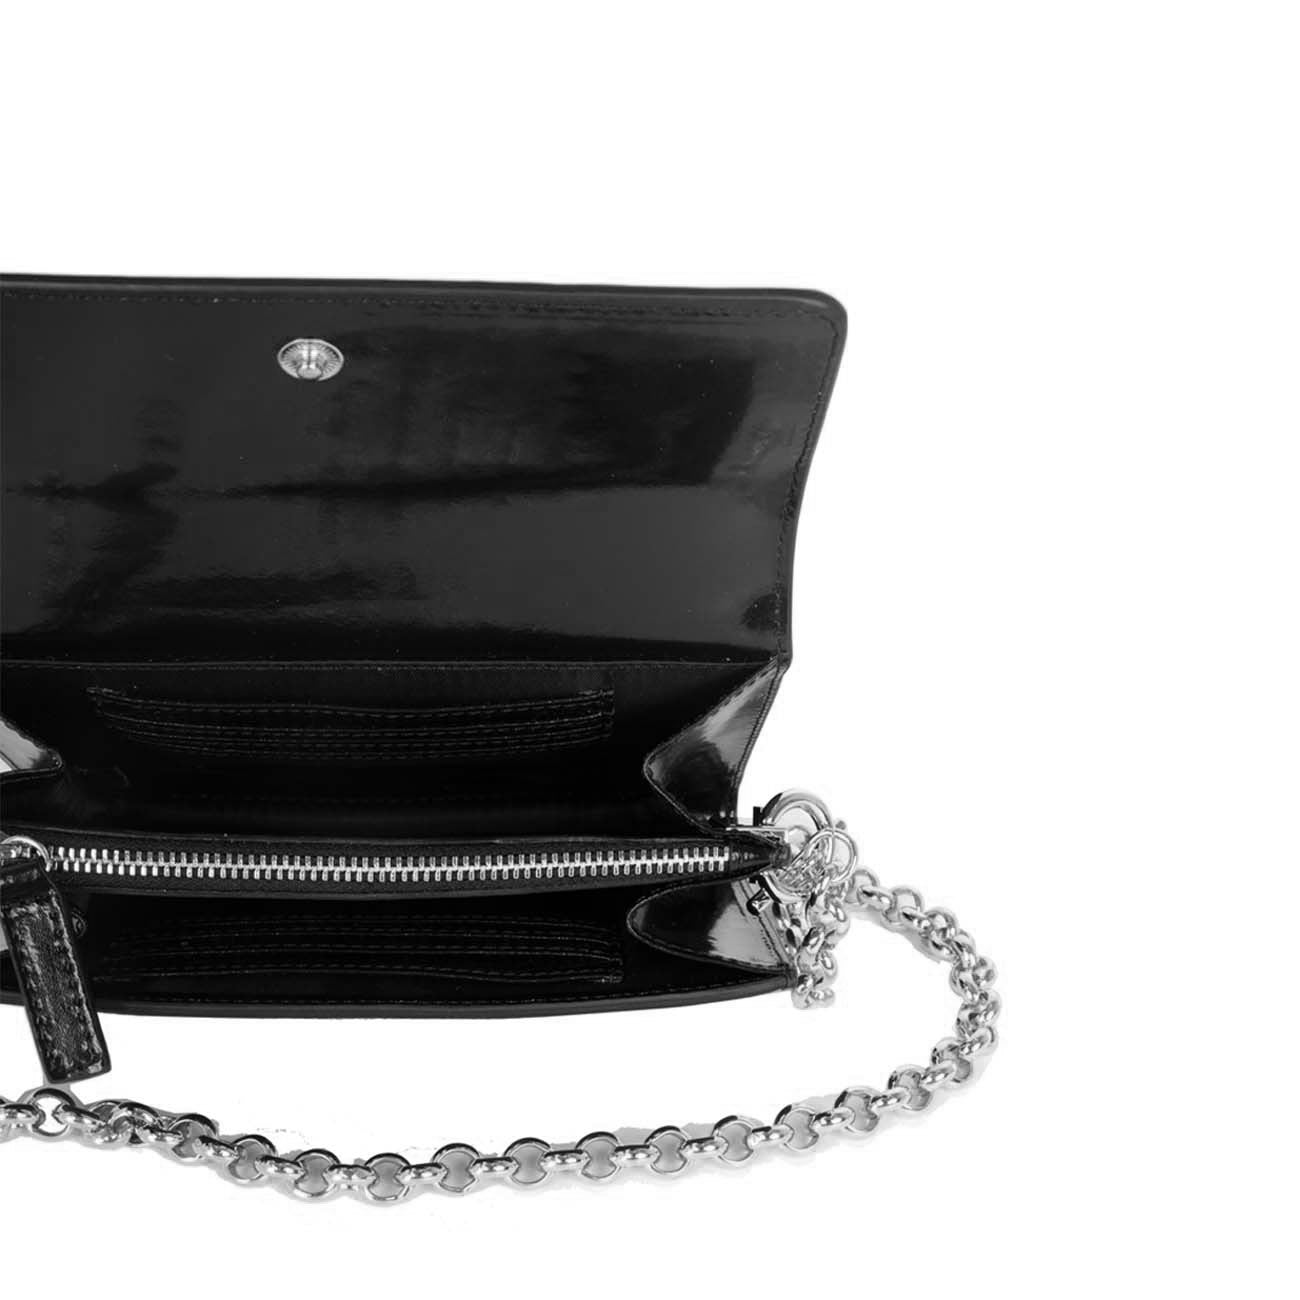 SAMPLE - The Juicy Patent Phone Wallet Black Silver